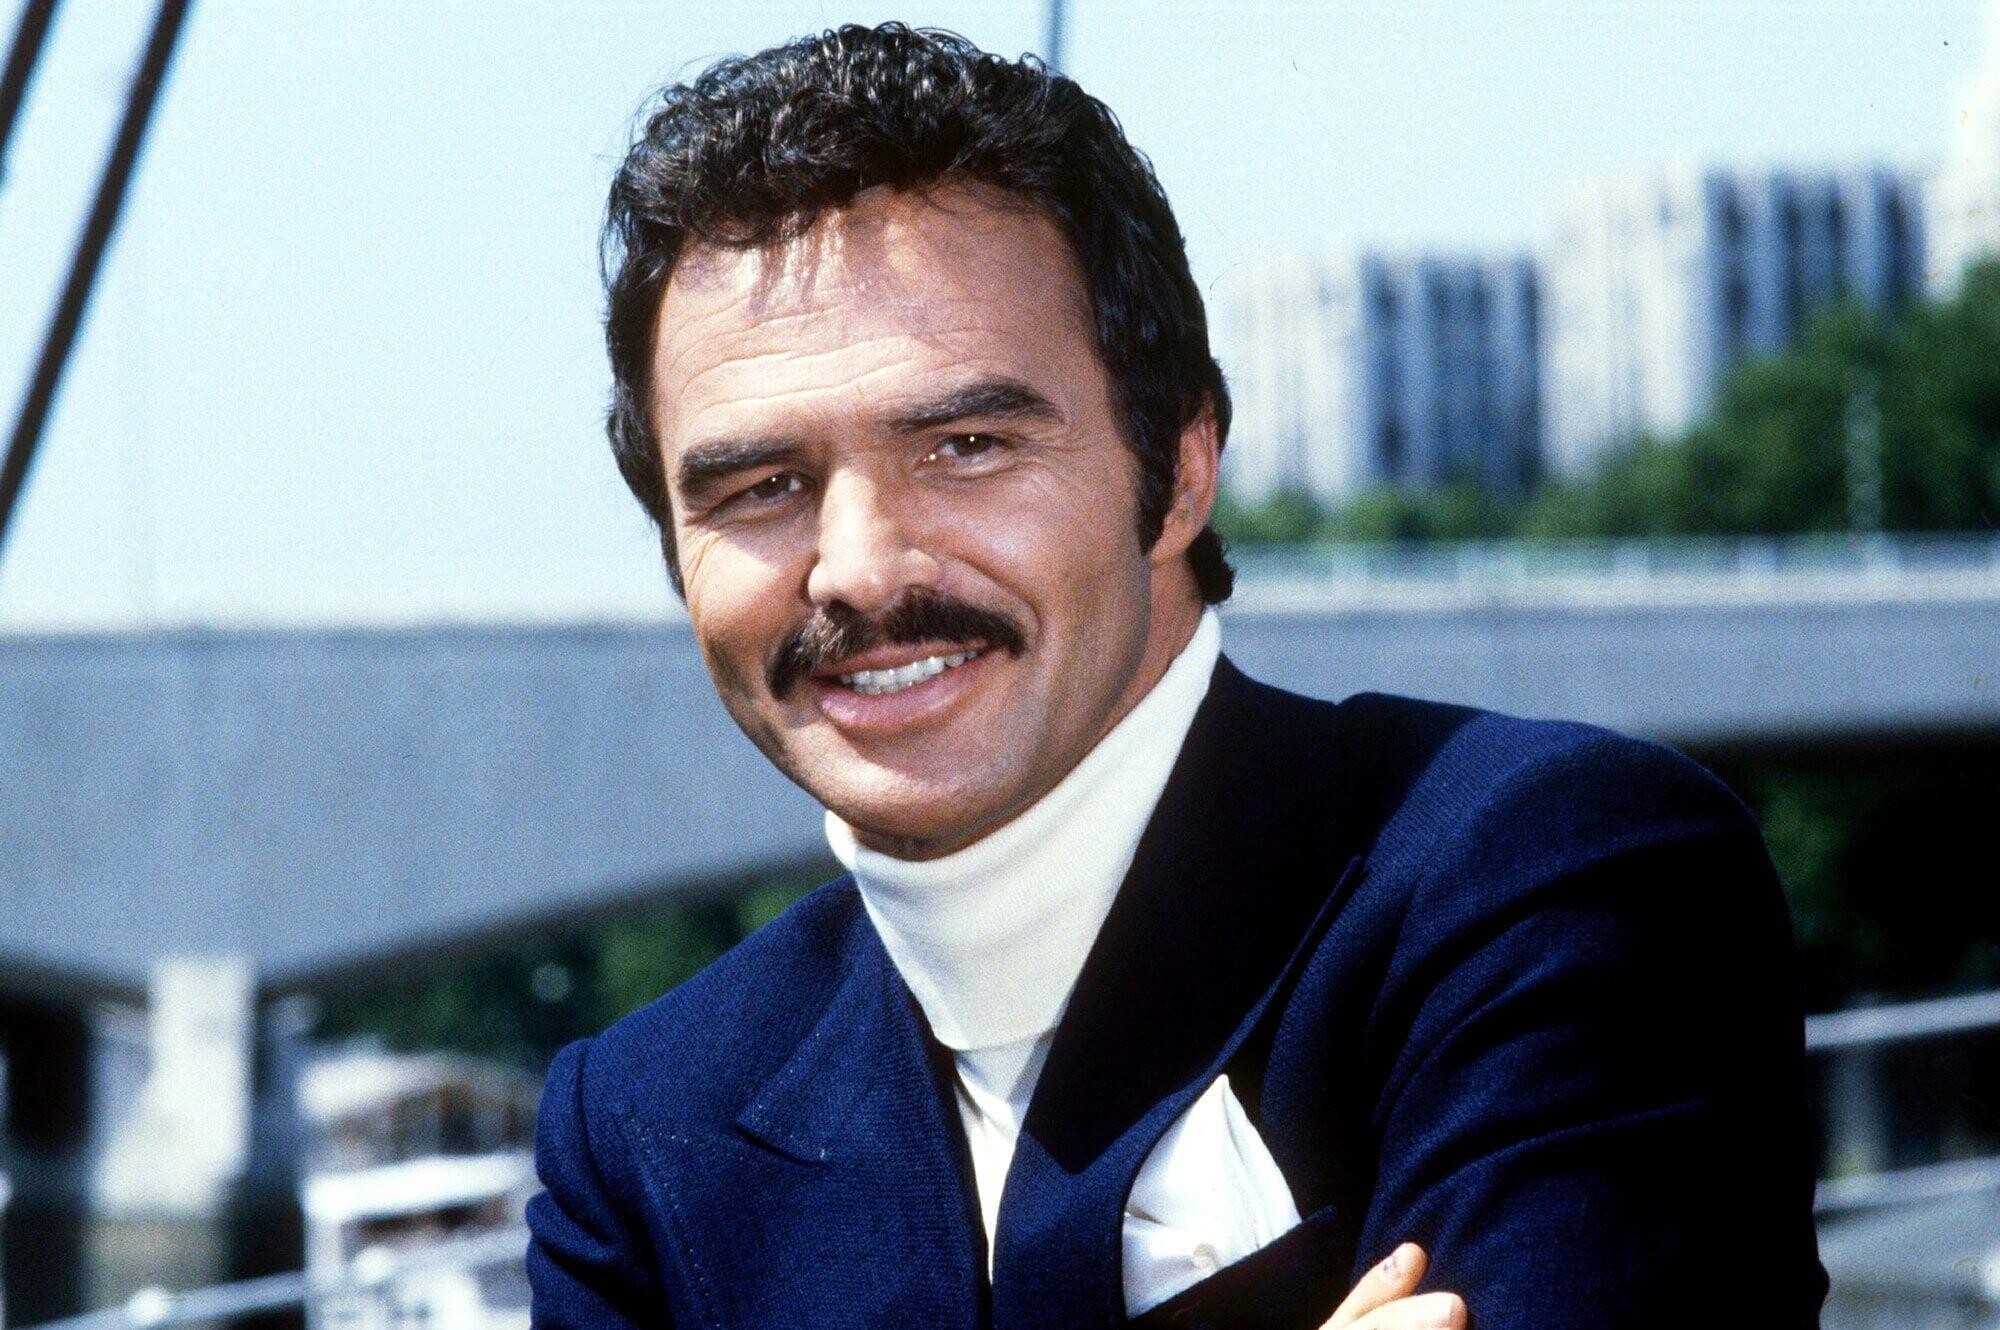 Burt Reynolds: A sex symbol of the 1980s, Acting talent, Appeal to film audiences, Award-winning actor. 2000x1330 HD Wallpaper.